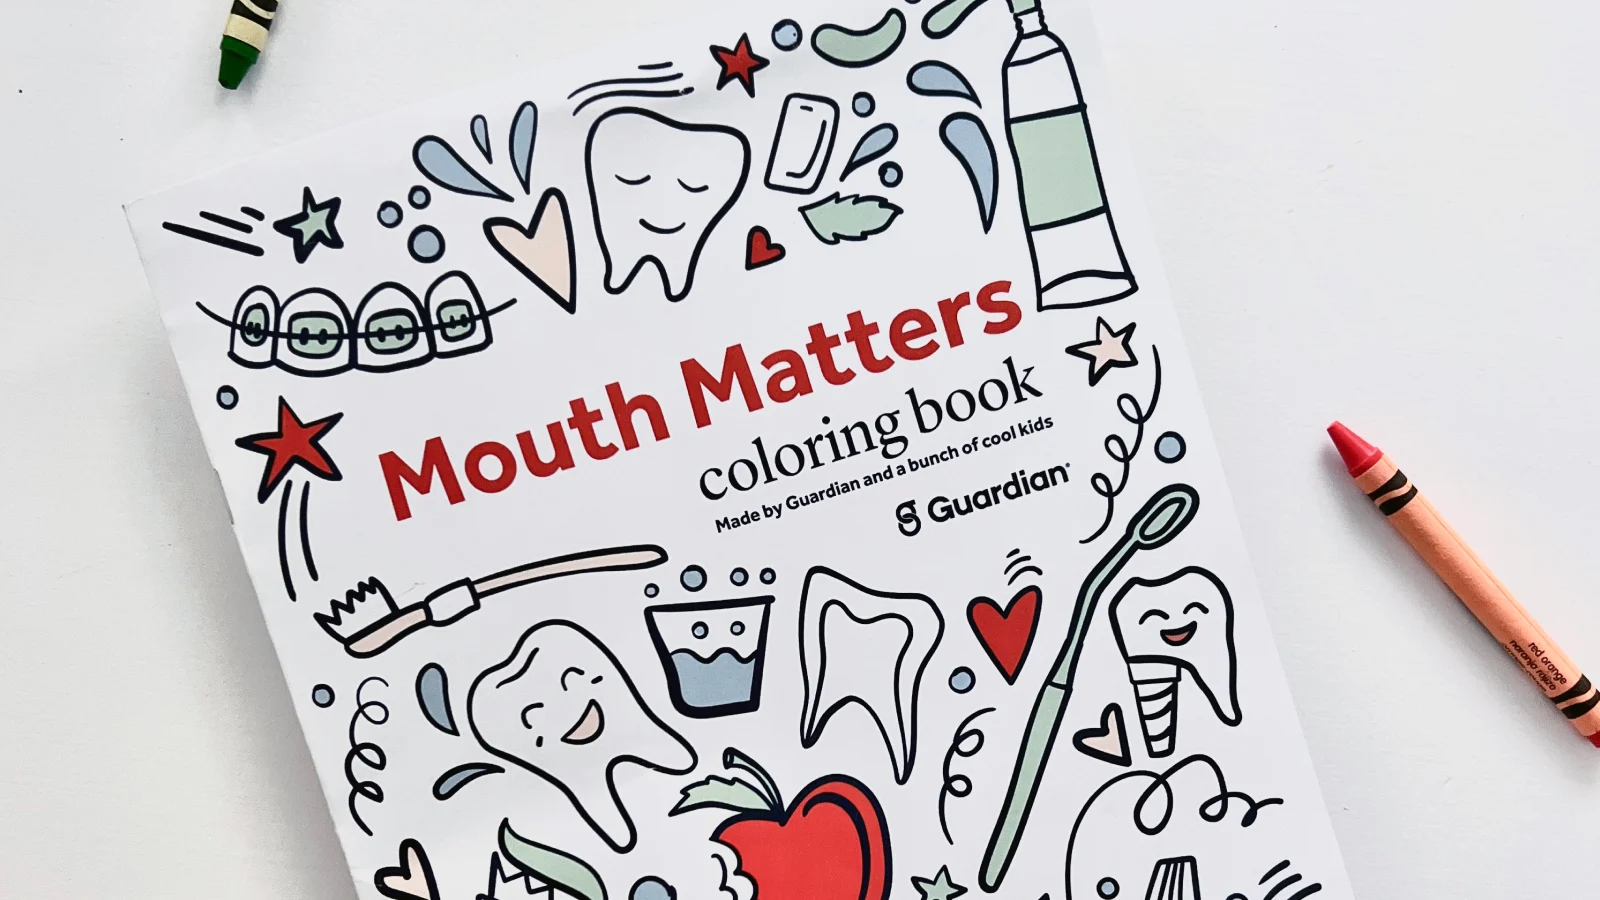 Mouth matters coloring book